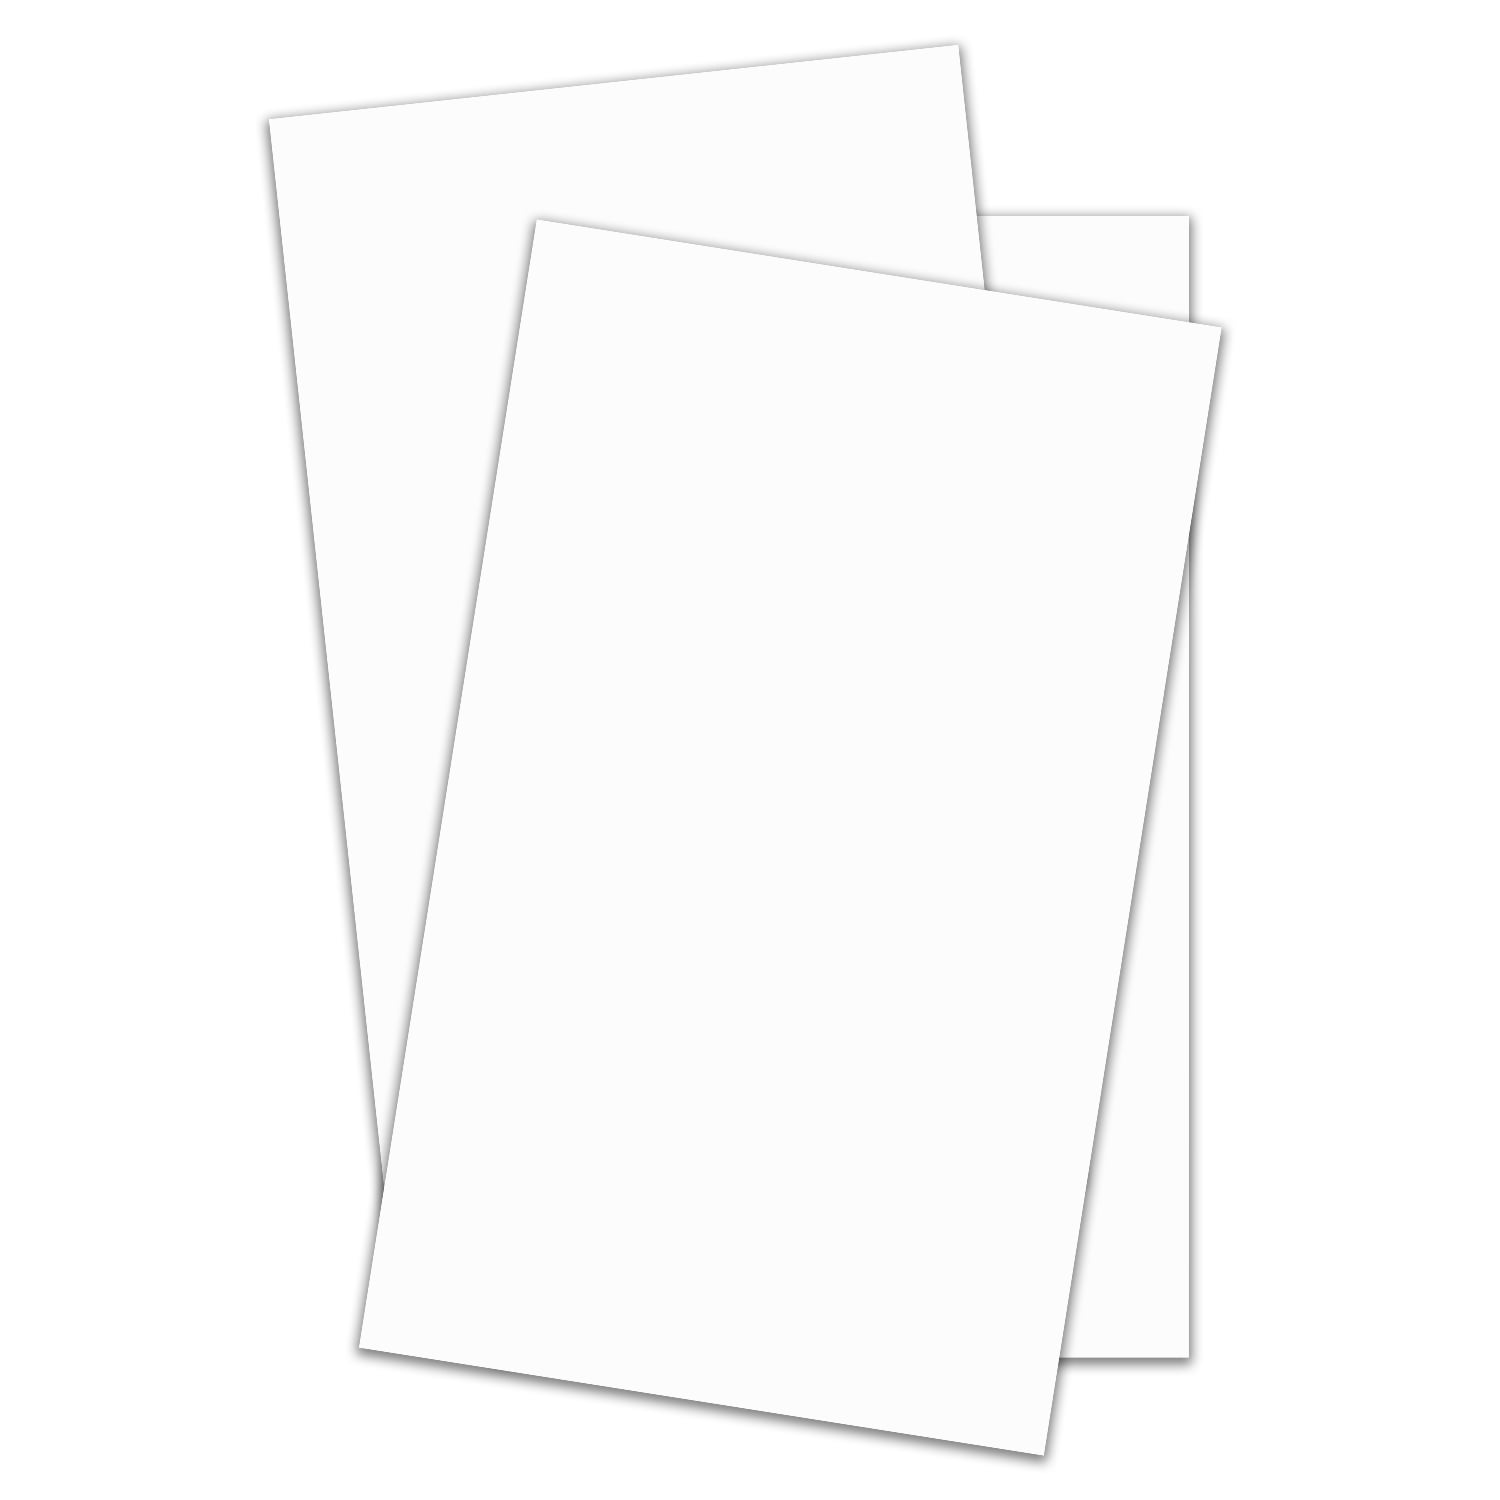  YINUOYOUJIA Cardstock 12 x 12 Thick Paper, 300gsm/110lb  Construction Paper 50 sheets white cardstock(White) : Arts, Crafts & Sewing